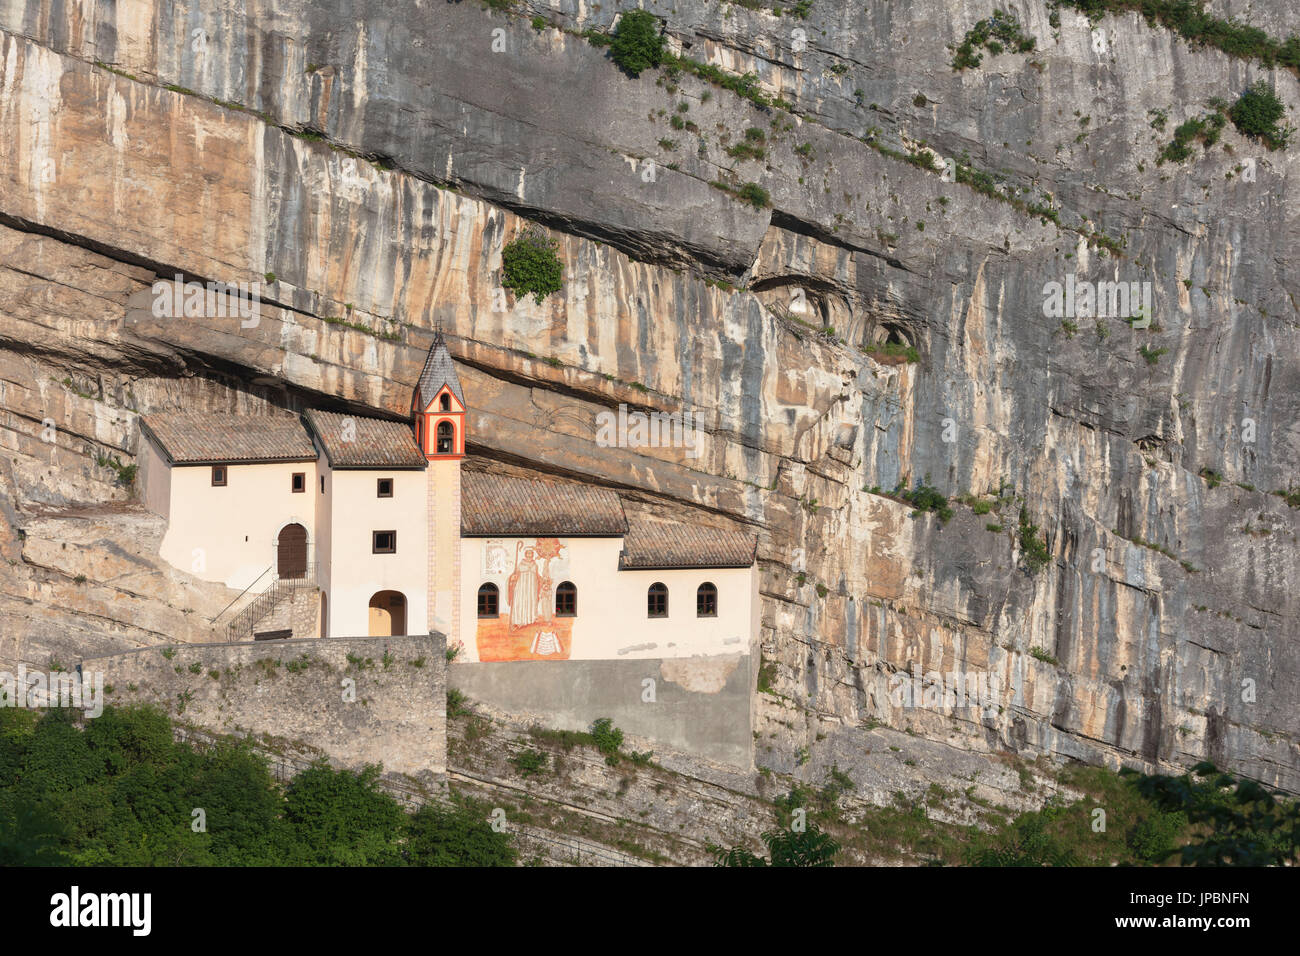 A view of Eremo di San Colombano, a monastery in Trambileno, Province of Trento, Italy, notable for its location in the side of a mountain. Stock Photo